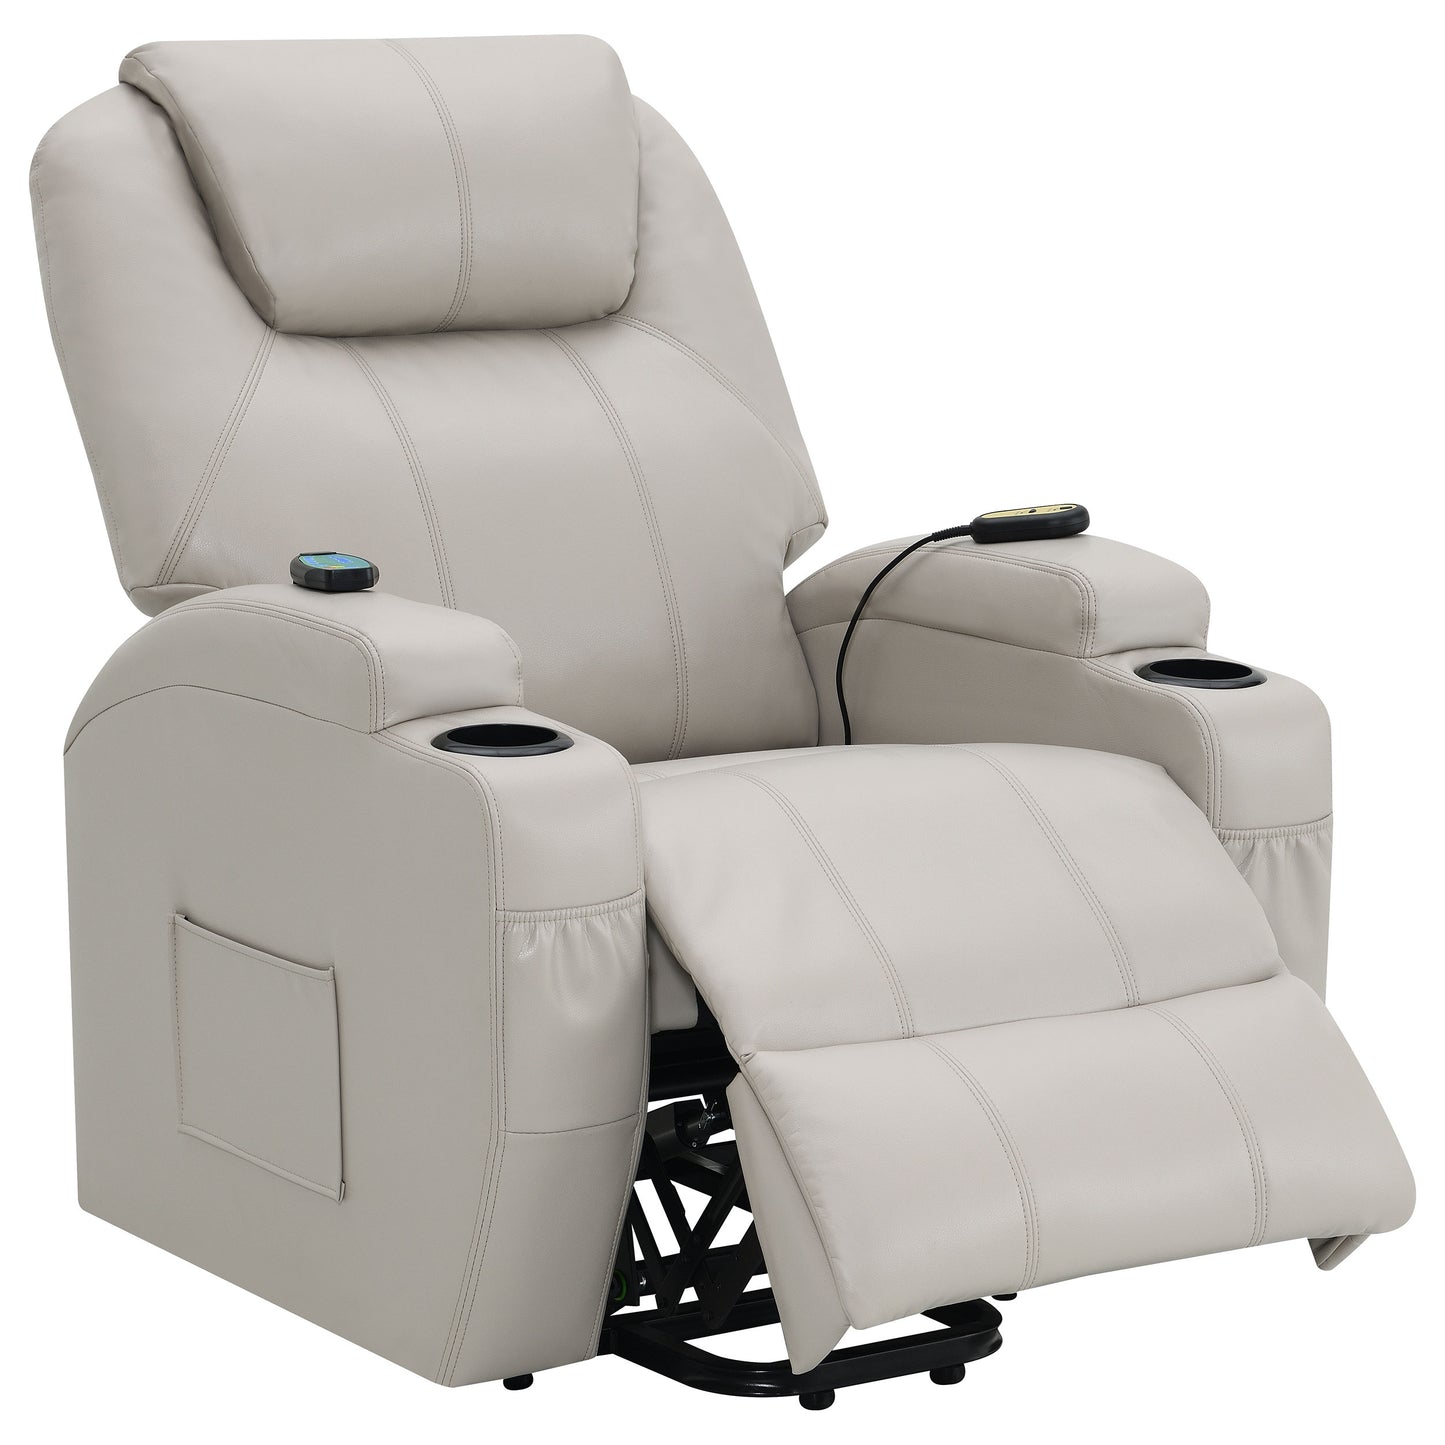 Sanger Upholstered Power Lift Recliner Chair with Massage Champagne